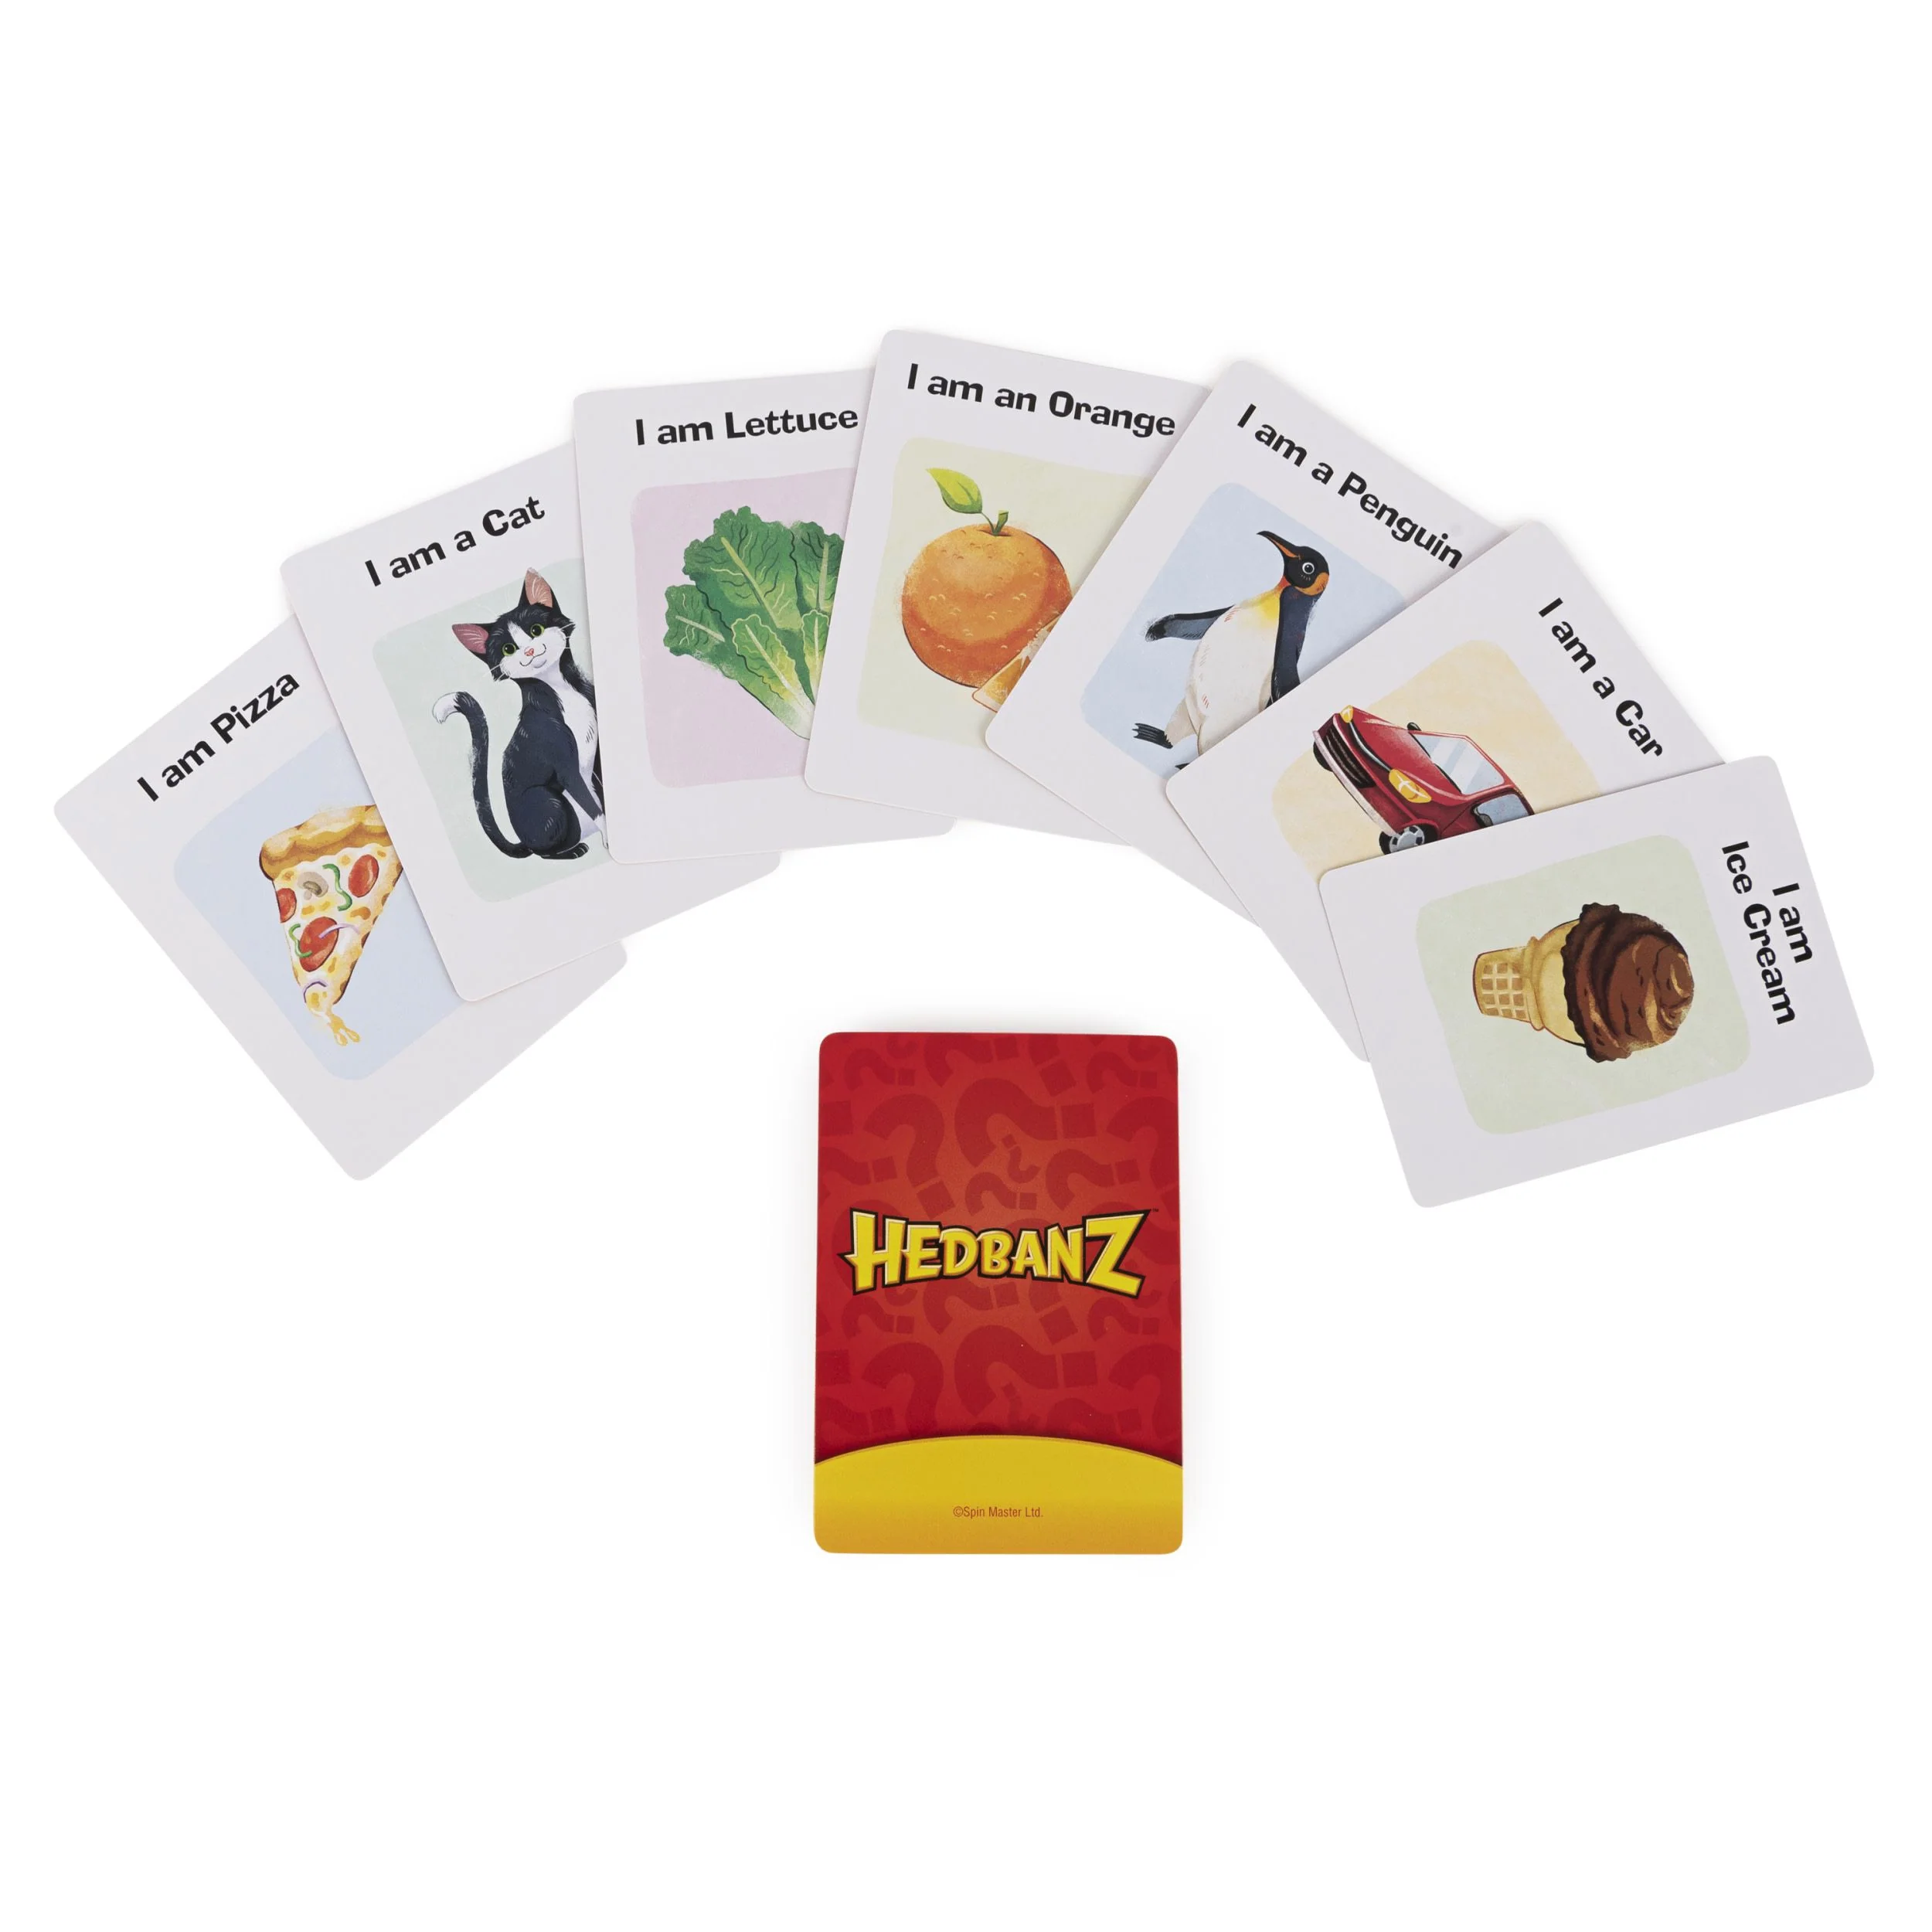 Headbanz Cards - Question Cards Game